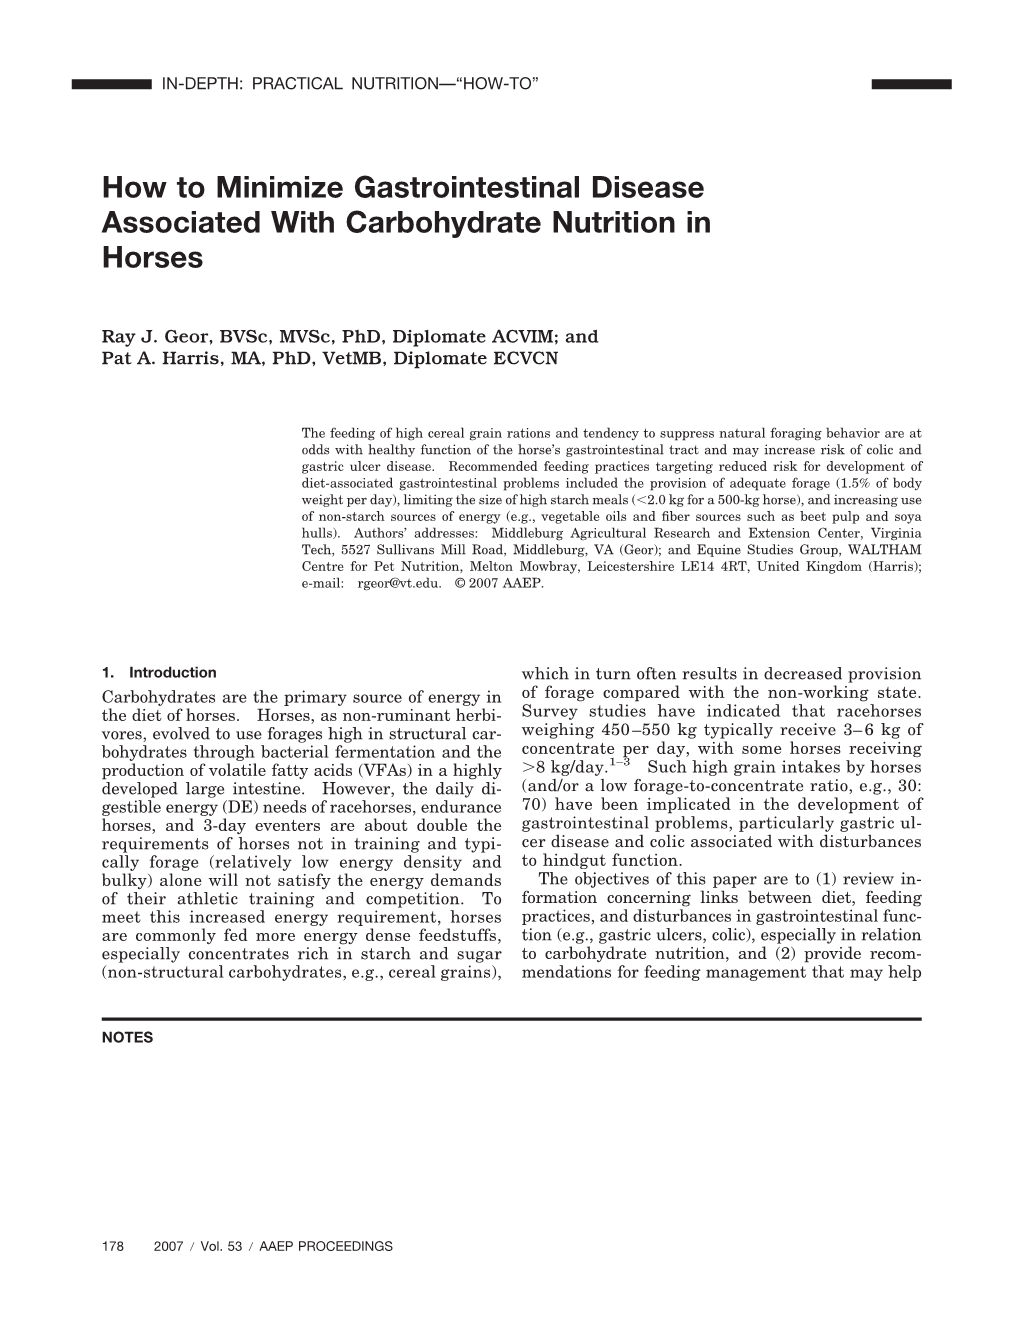 How to Minimize Gastrointestinal Disease Associated with Carbohydrate Nutrition in Horses